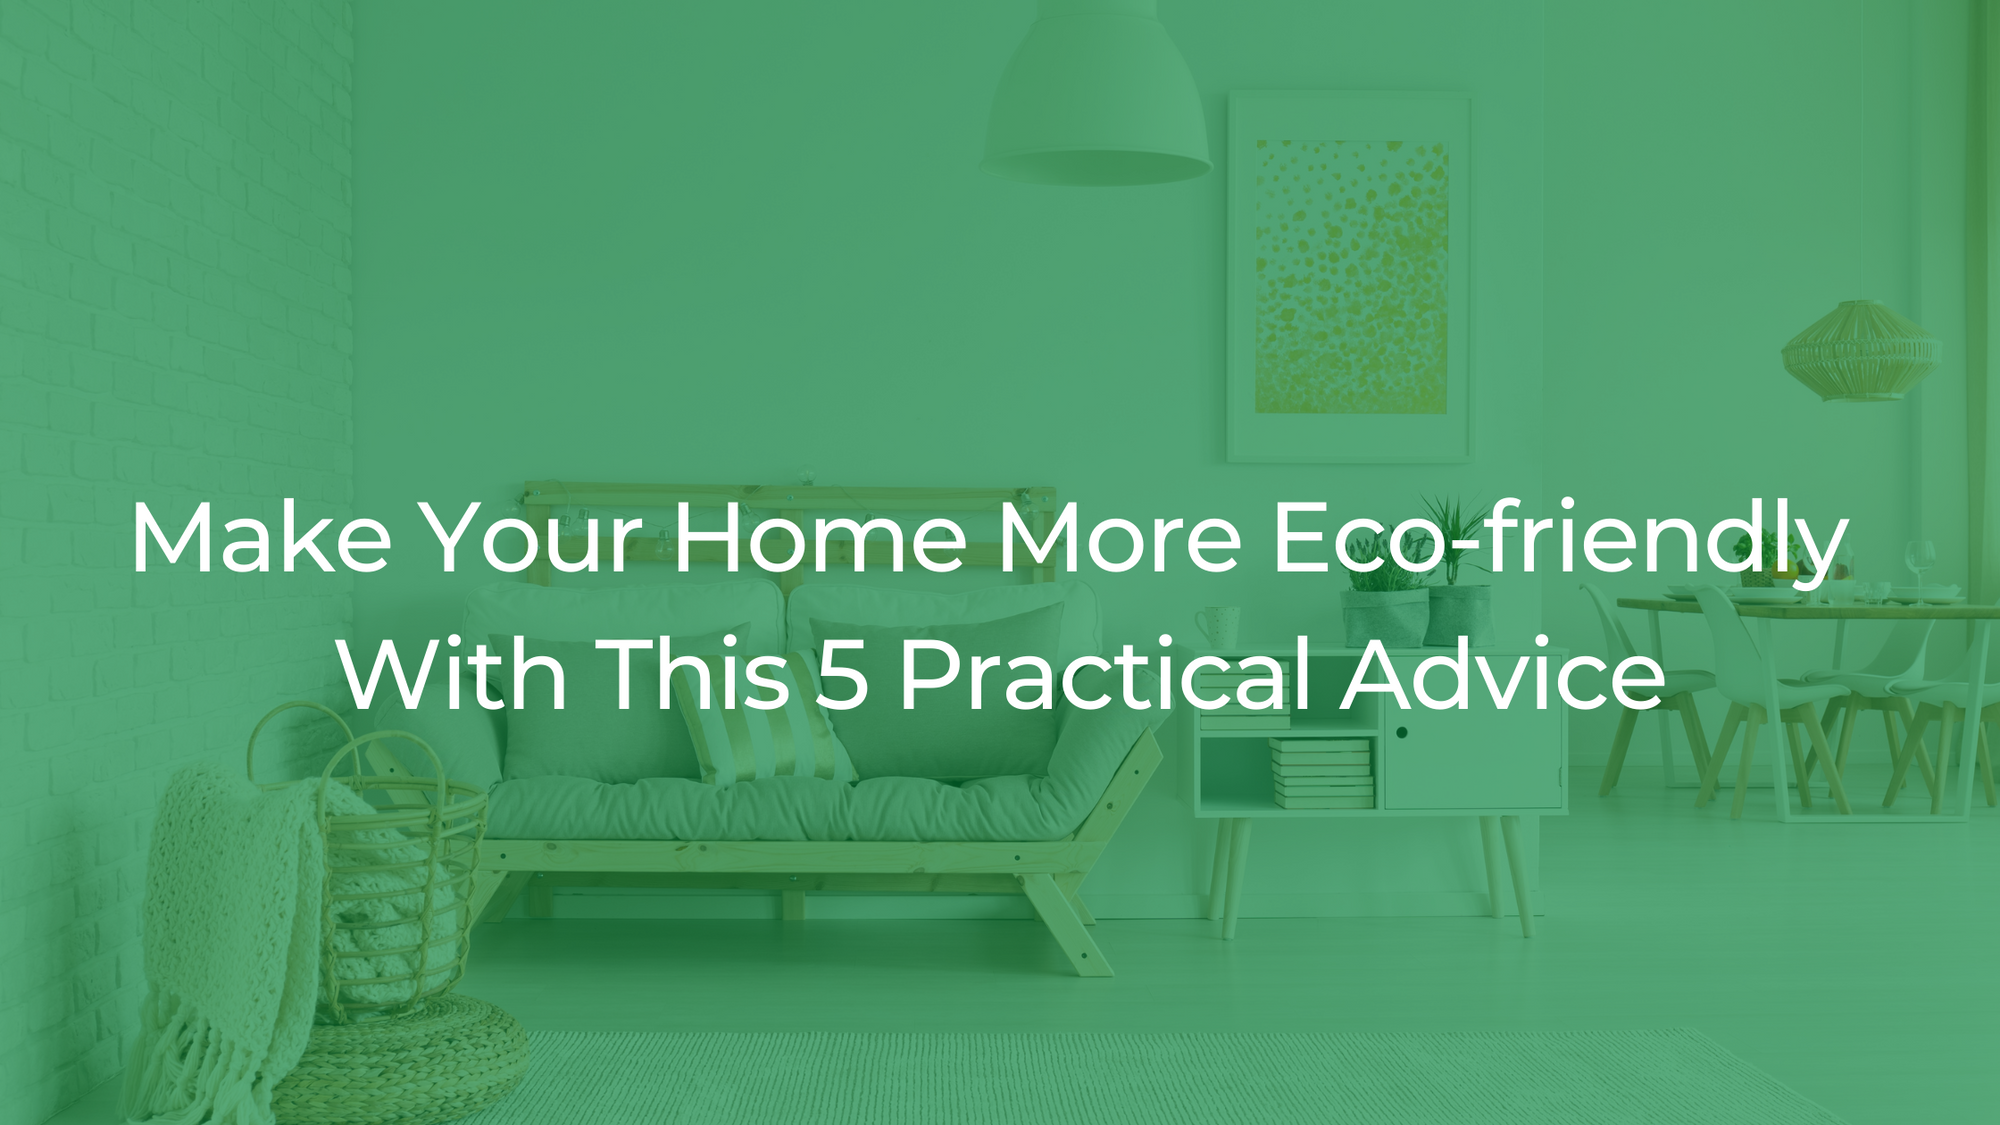 Make Your Home More Eco-friendly With This 5 Practical Advice